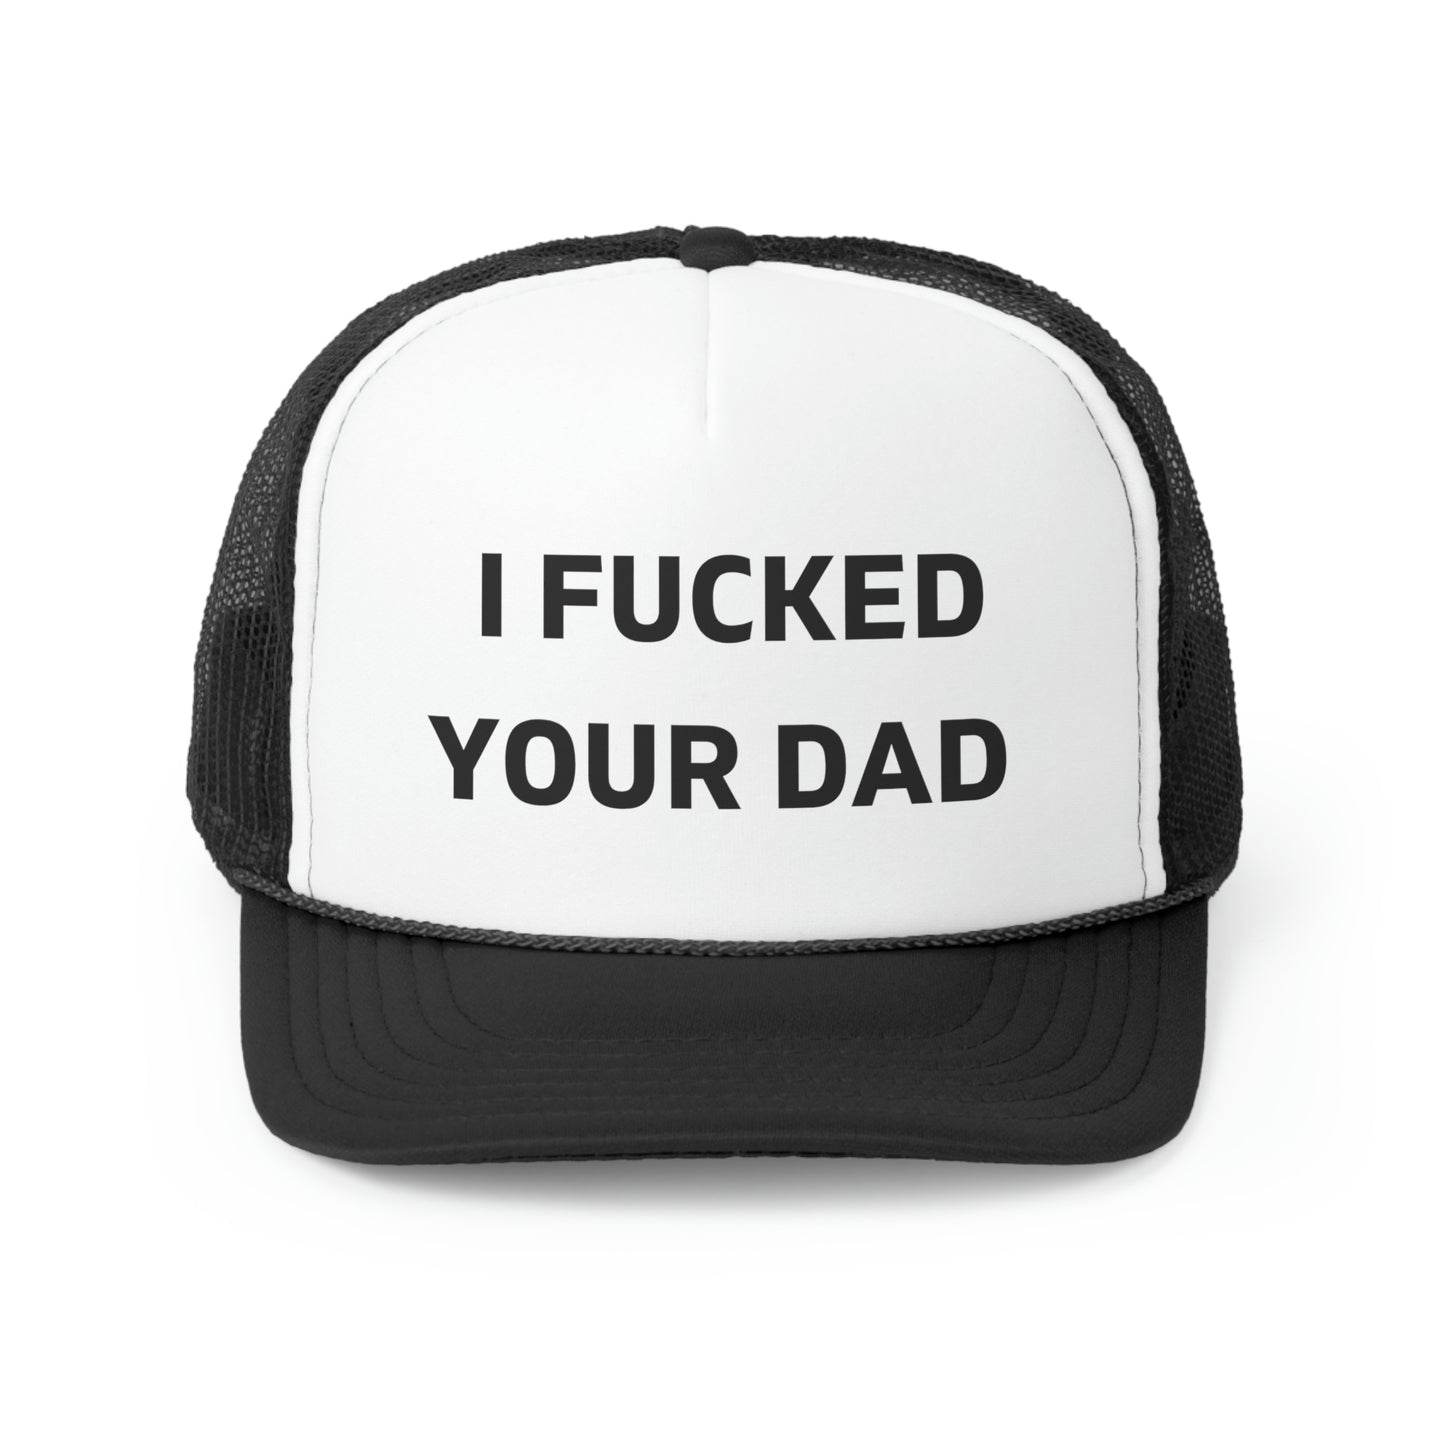 I Fucked Your Dad